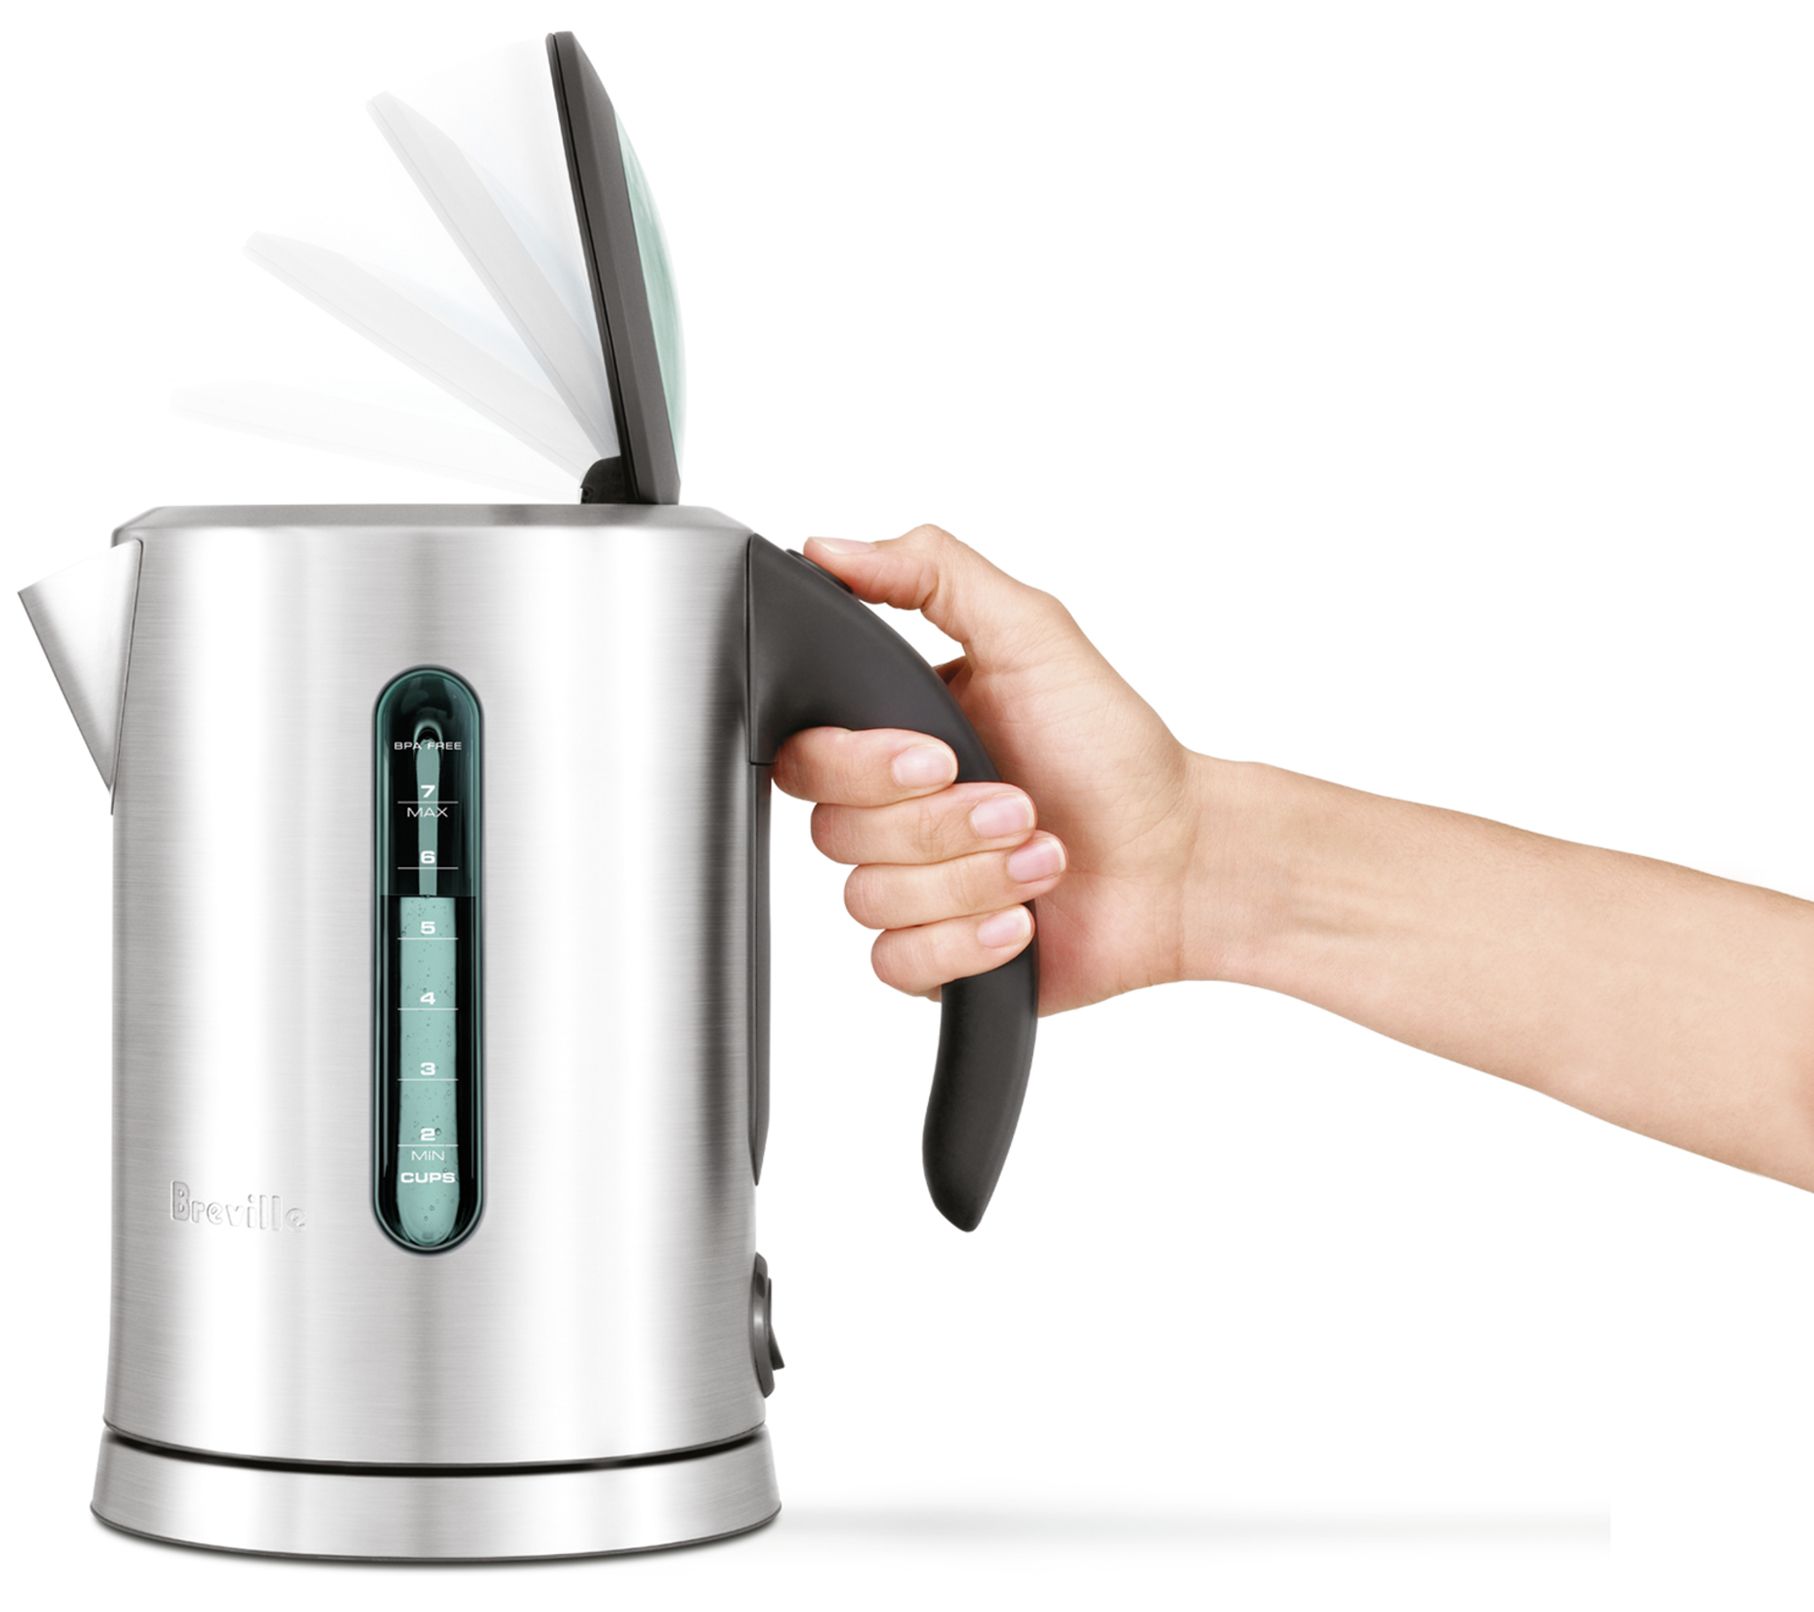 Breville the IQ Kettle 7-Cup Electric Kettle Brushed Stainless